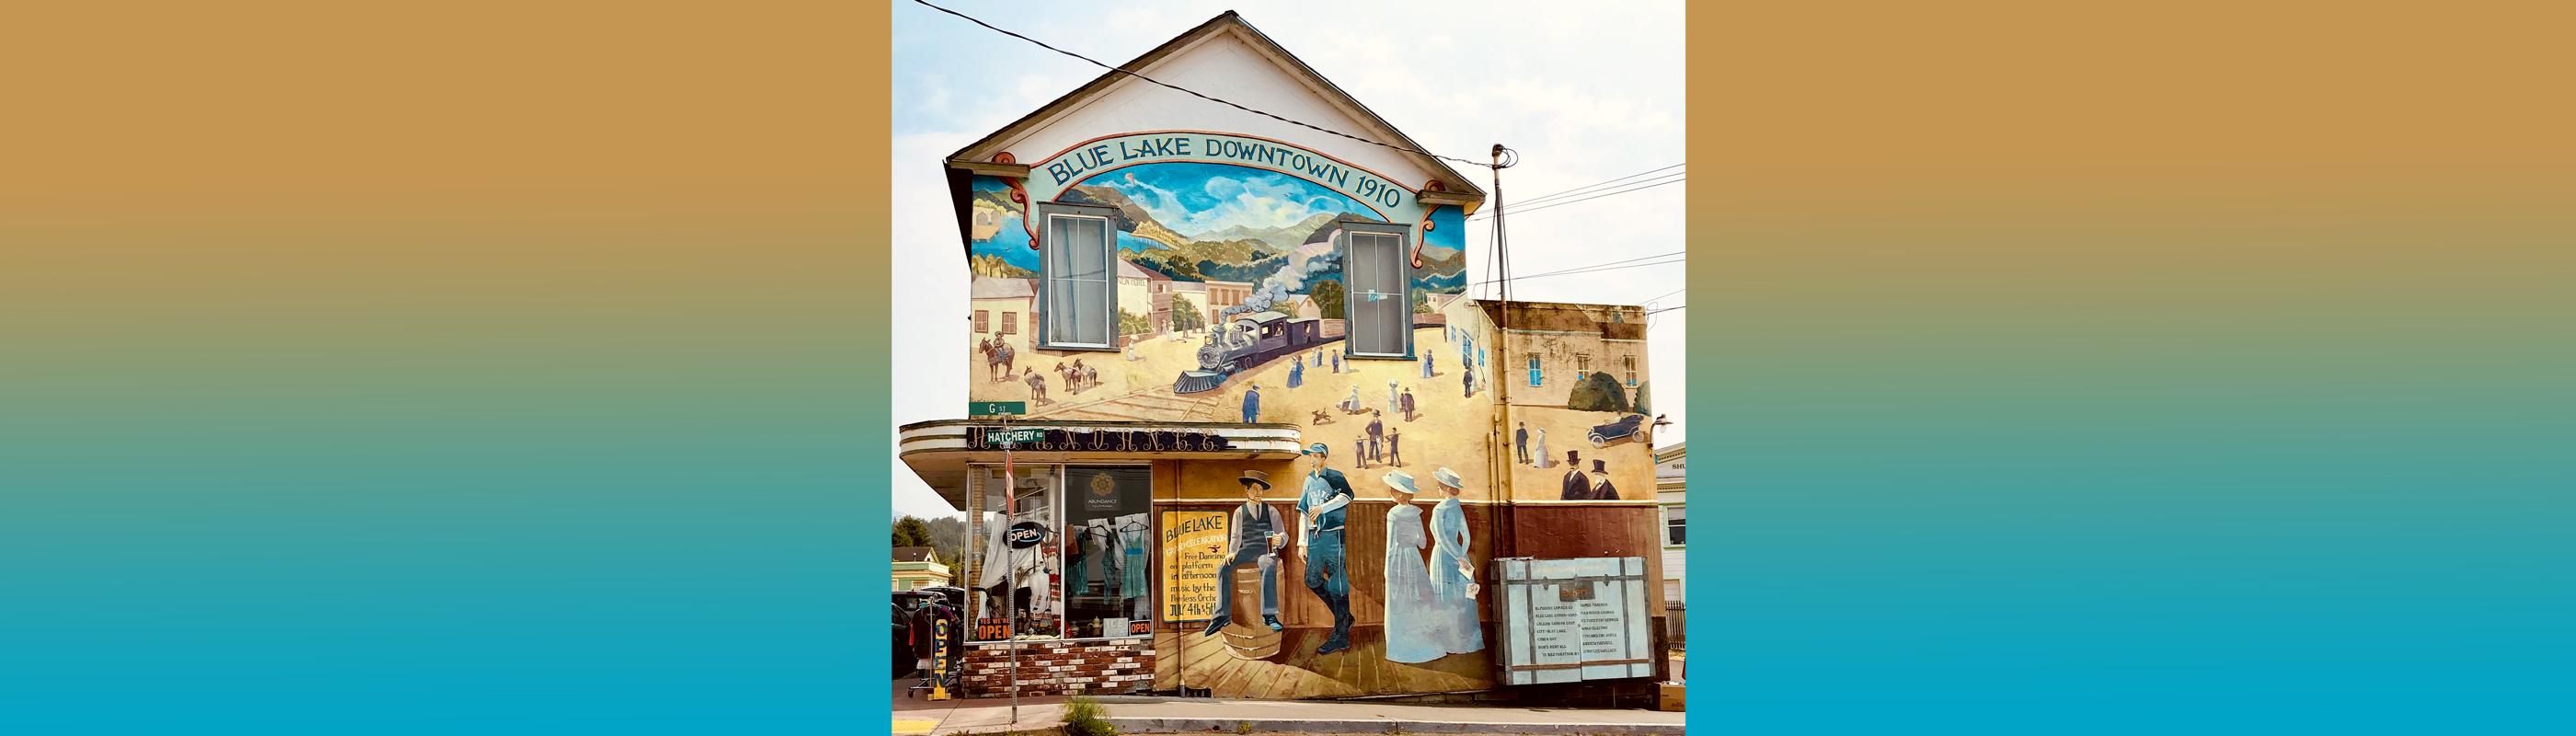 Mural on building in Blue Lake